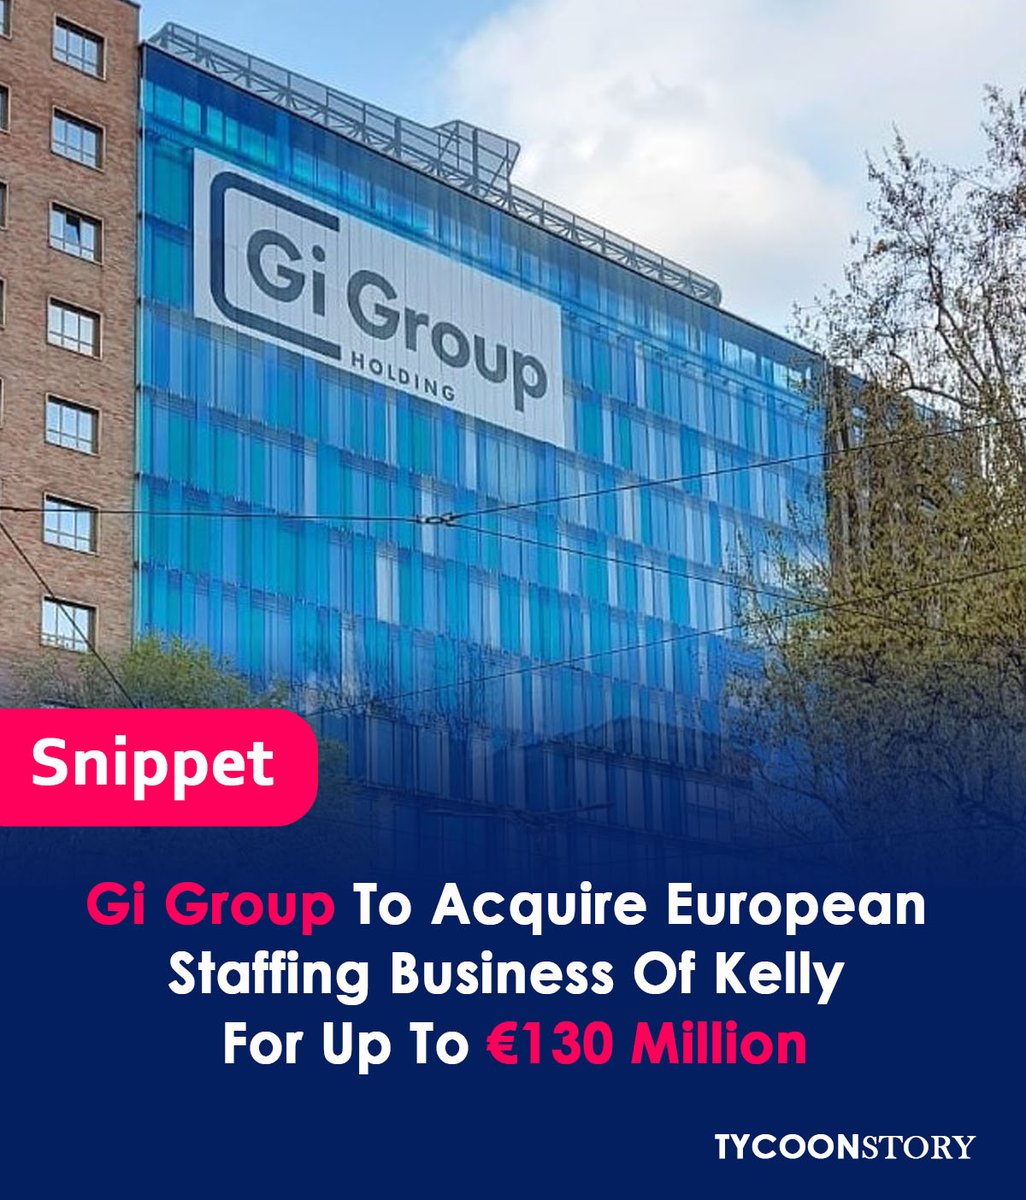 Gi Group to acquire Kelly's European staffing business for €130 million
#EuropeanStaffing #businessdeals #EuropeanEconomy #GlobalStaffing #recruitment #UnitedKingdom #recruitingservices #Europe #GiGroupExpands #TalentSolutions #businessnews #italy #HumanResources @Gigroupindia